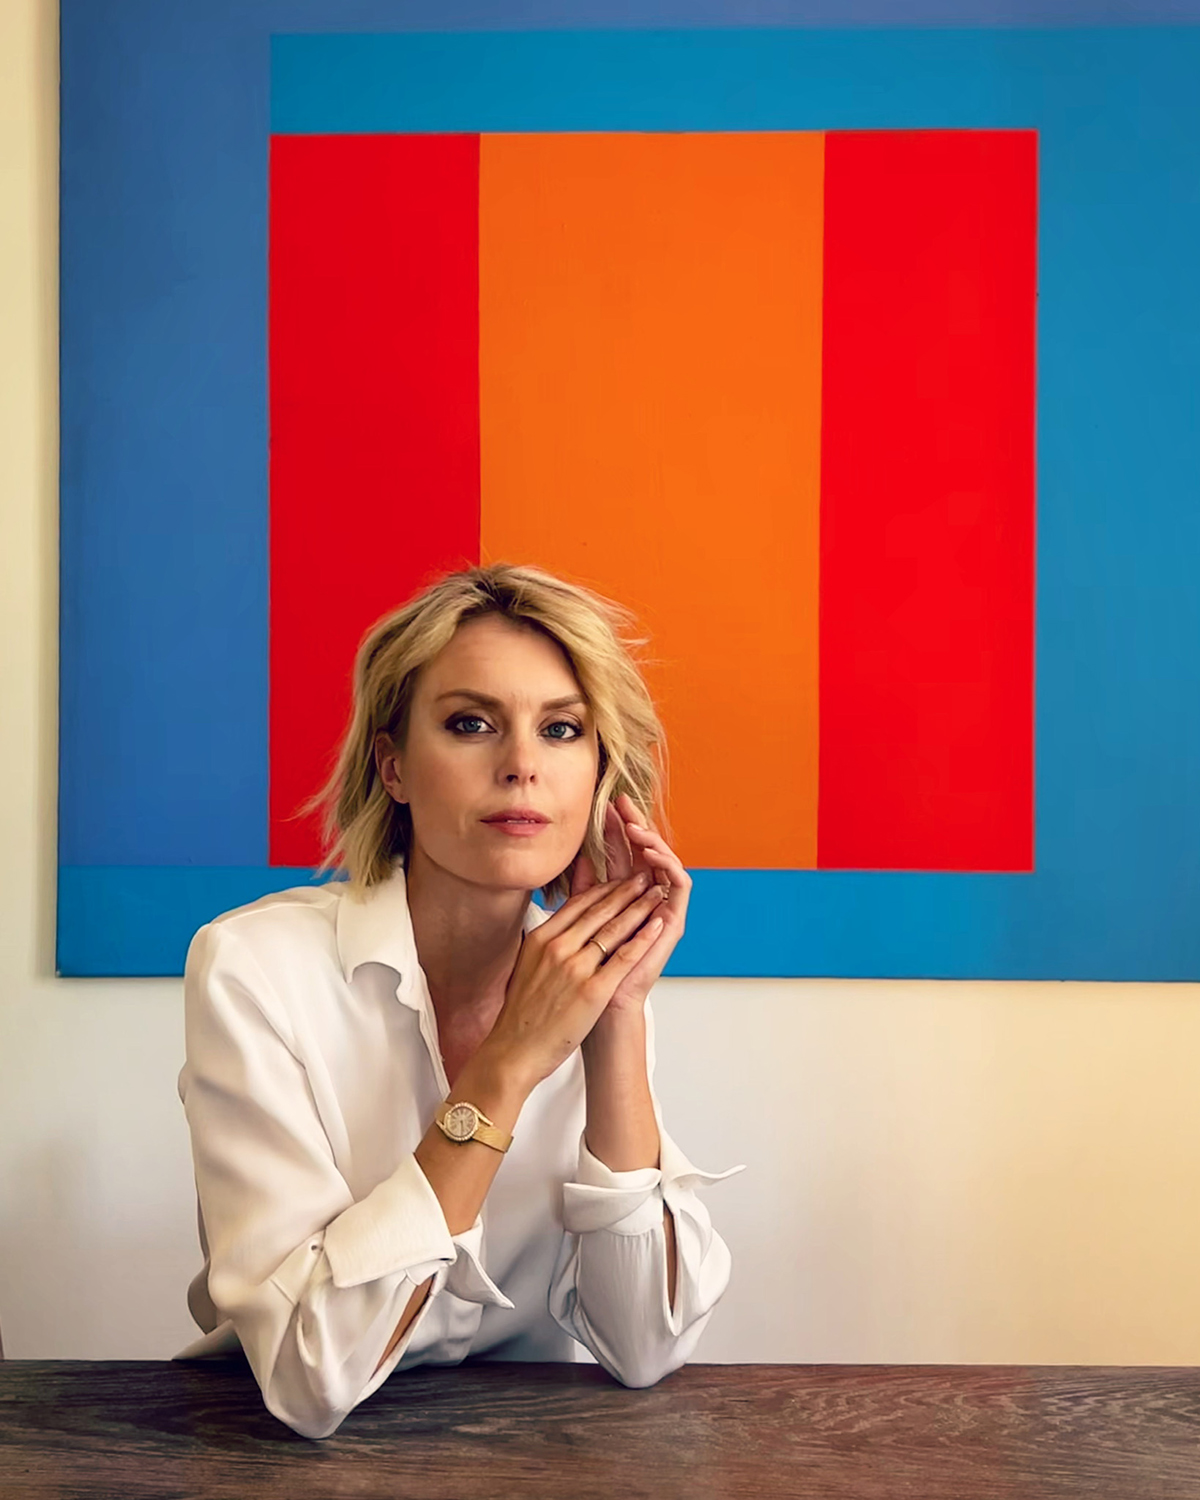 A blonde woman wearing a white shirt sitting in front of a blue orange and red block colour painting